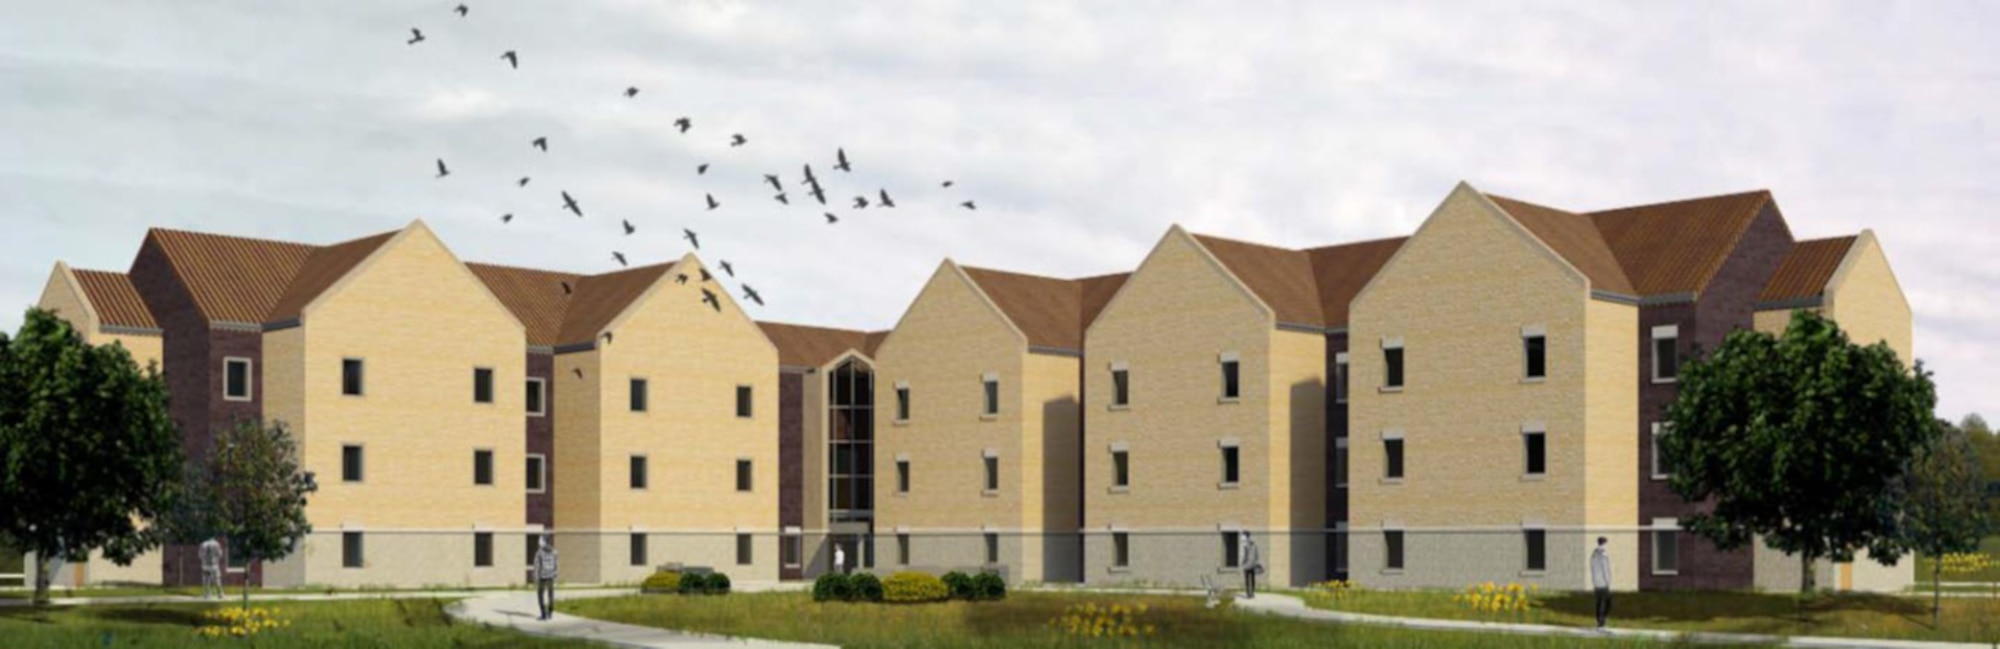 The U.S. Army Corps of Engineers awarded an $18.8 million contract January 17 to build a brand-new, 120 person dormitory on base. The new LEED Silver dorm will include a full brick exterior from the ground to the roof, which reduces maintenance and has a longer life span than hardboard siding. (Courtesy graphic)